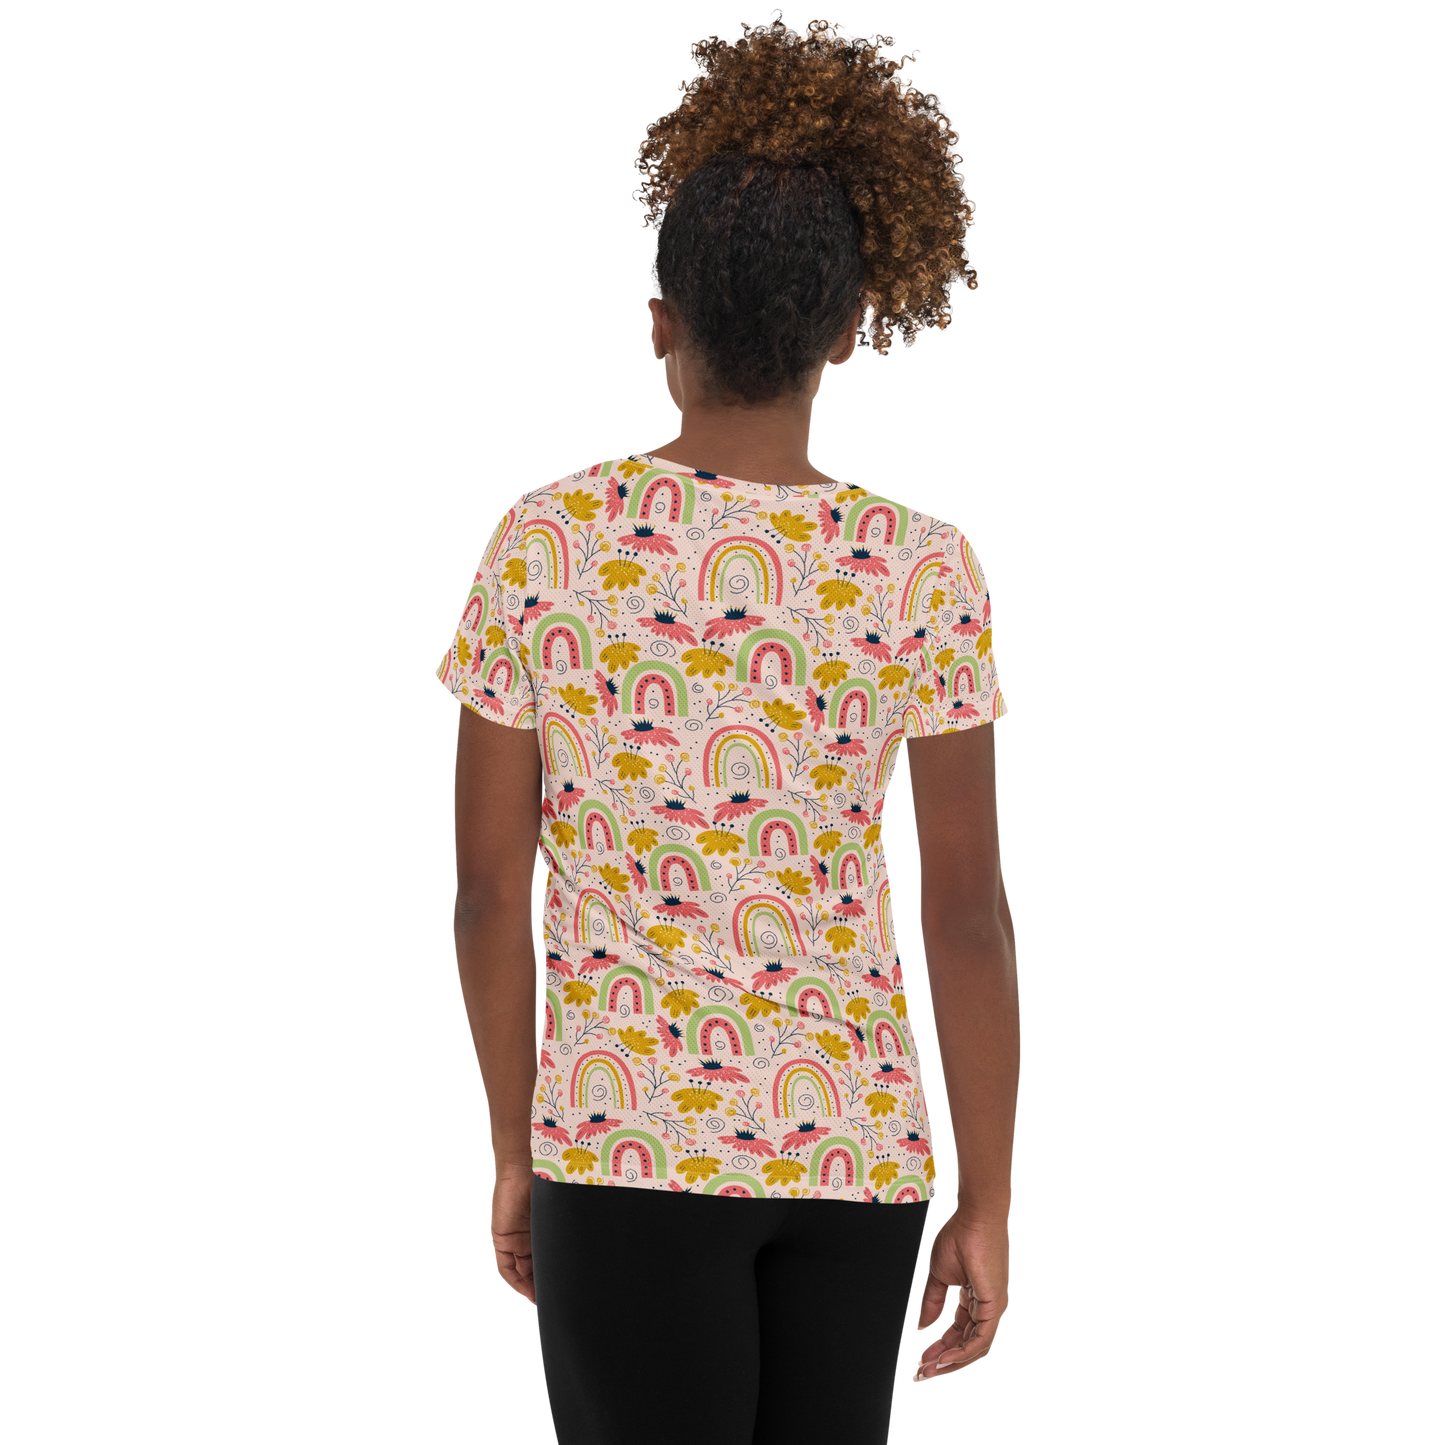 Scandinavian Spring Floral | Seamless Patterns | All-Over Print Women's Athletic T-Shirt - #7